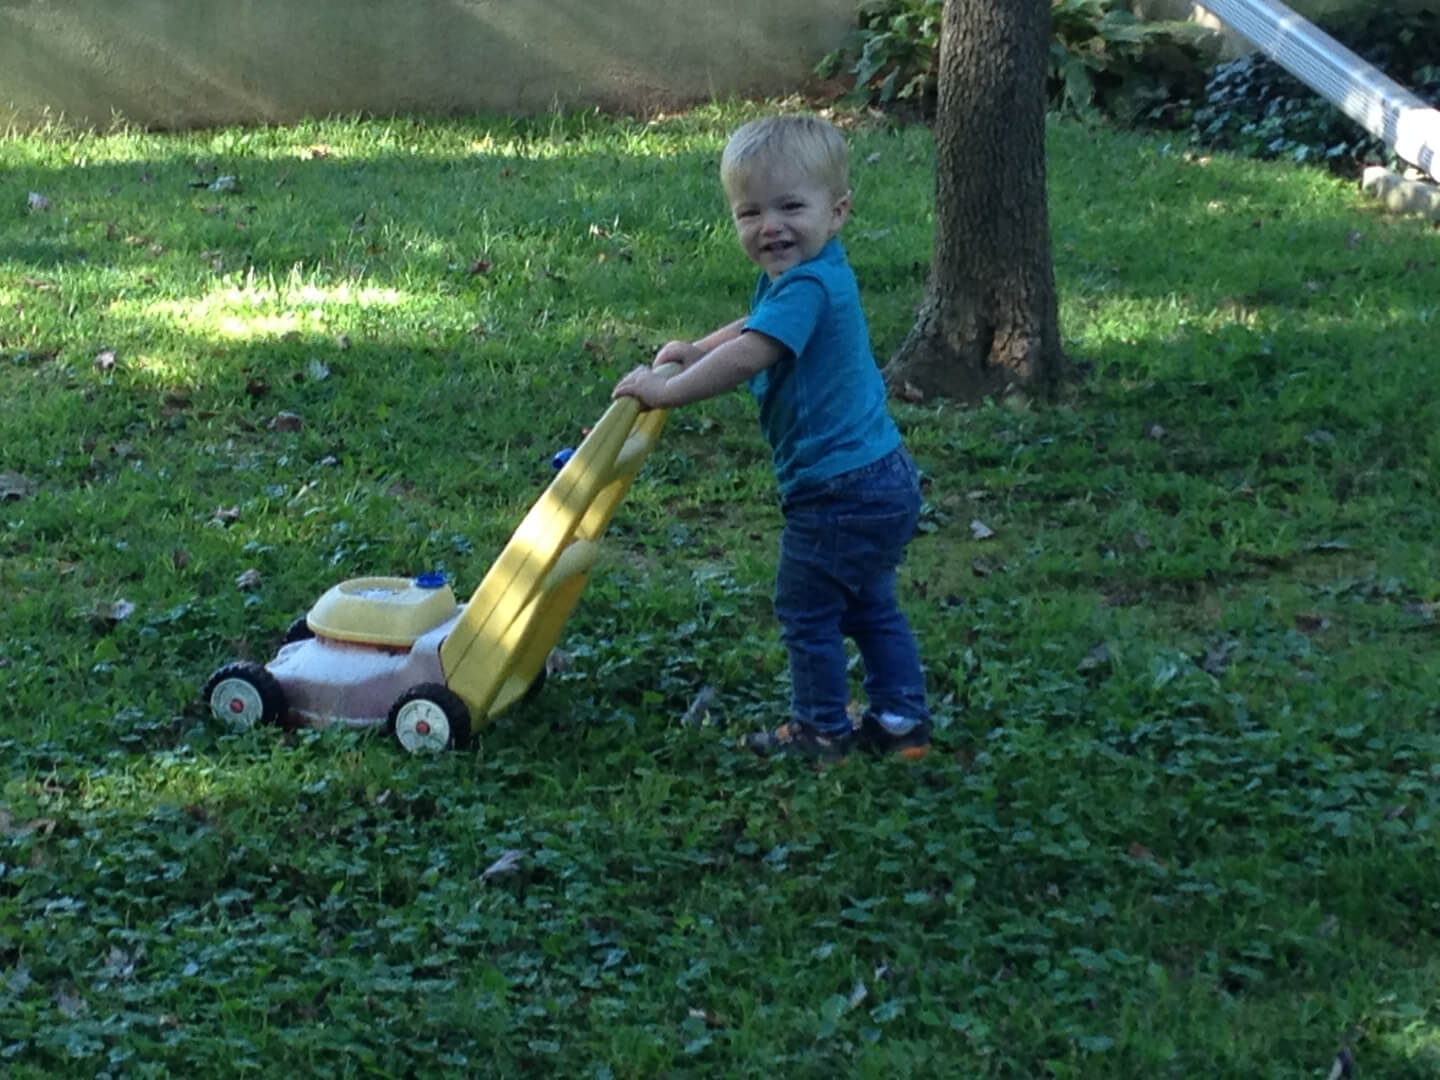 Kid playing with a toy lawnmower